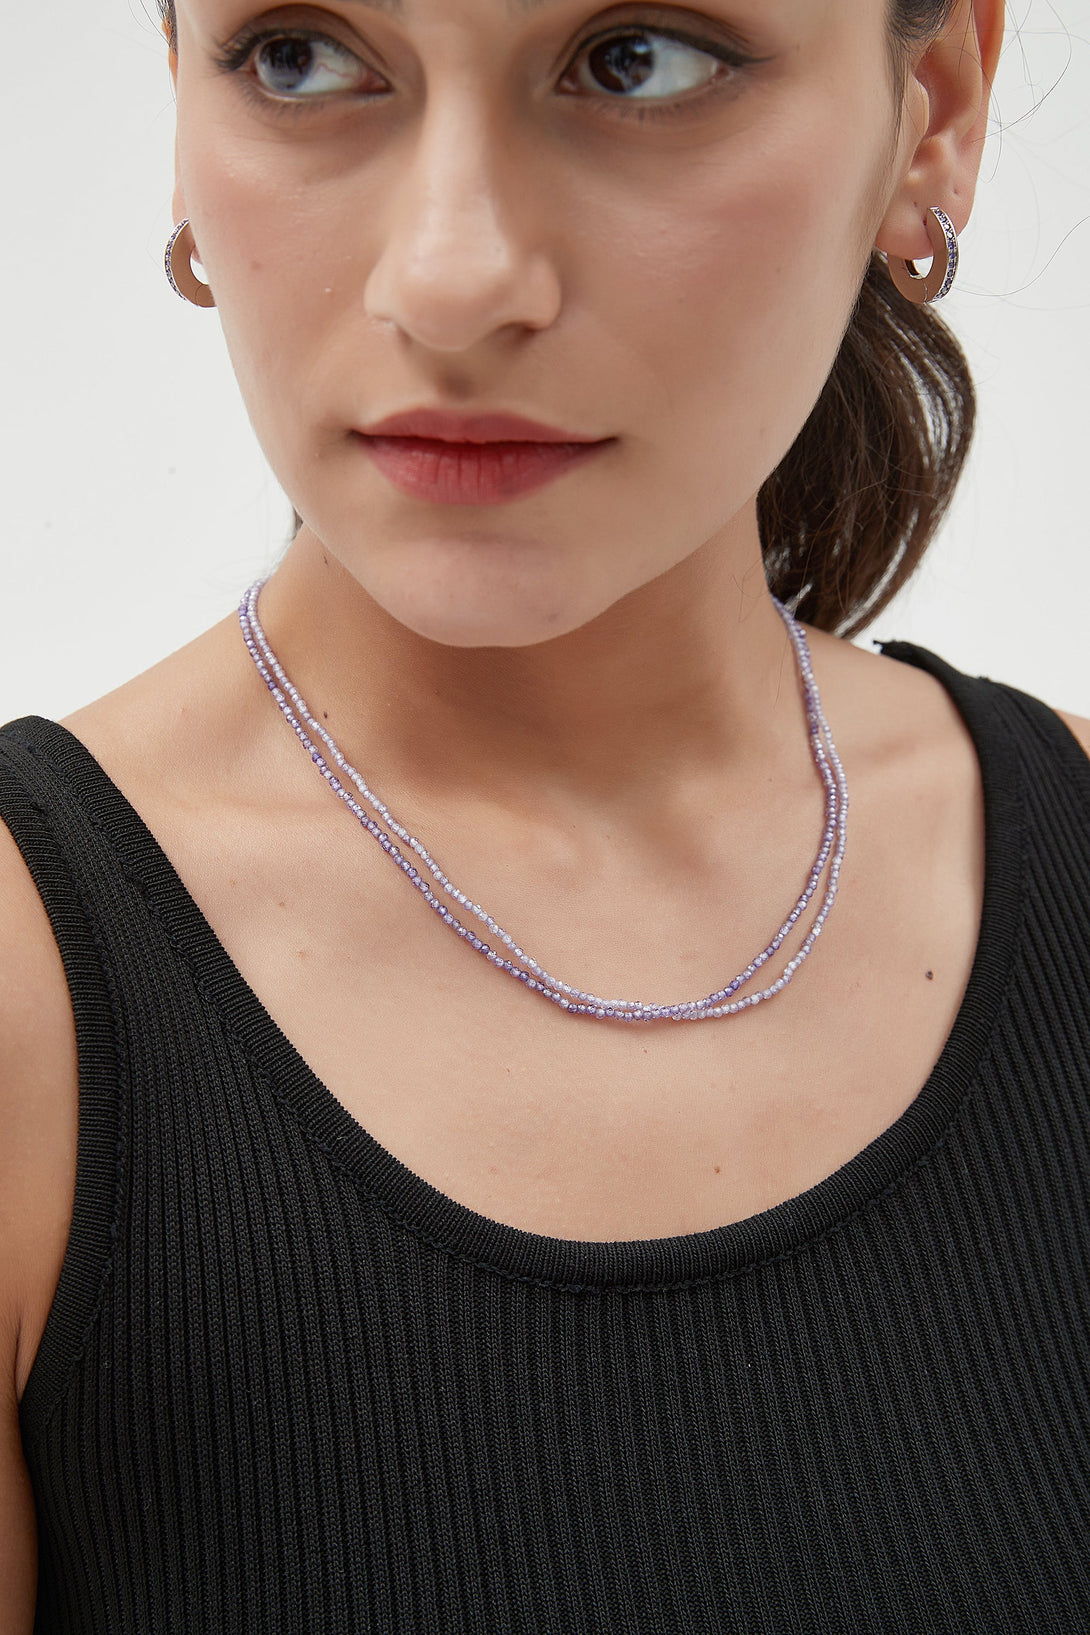 Clarice Purple Crystal Mini Beaded Double Layered Necklace - Classicharms